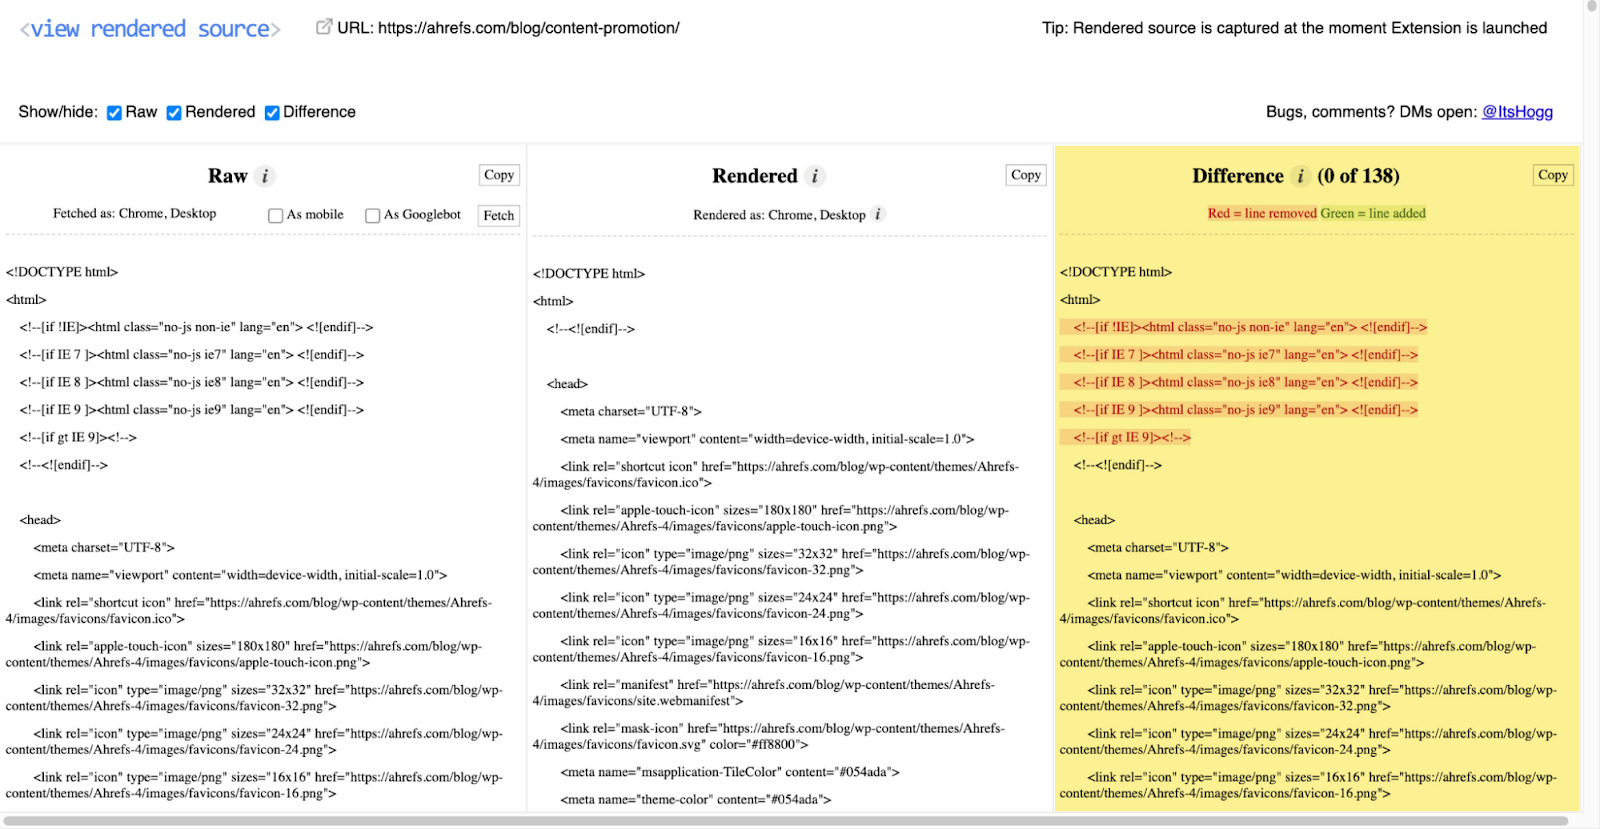 Page showing three columns: raw HTML, rendered HTML, and what the differences are